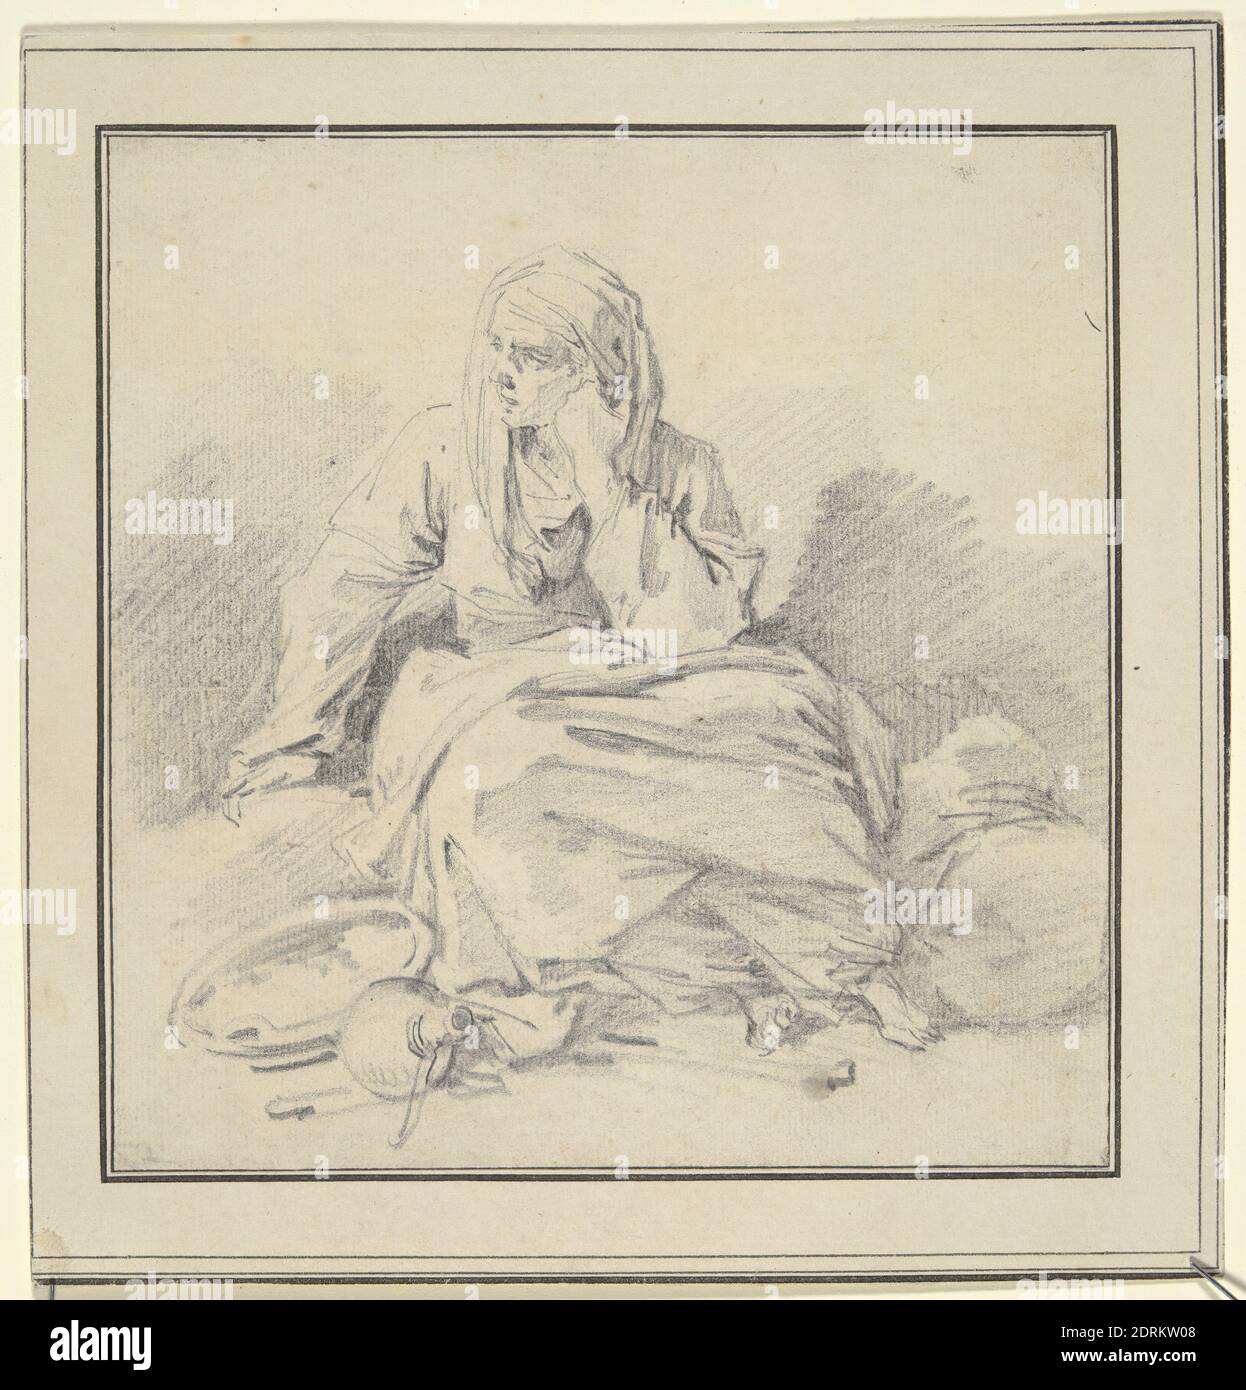 Artist: Jean-Honoré Fragonard, French, 1732–1806, Seated Woman, Graphite,  19.3 × 18.3 cm (7 5/8 × 7 3/16 in.), Made in France, French, 18th century,  Works on Paper - Drawings and Watercolors Stock Photo - Alamy